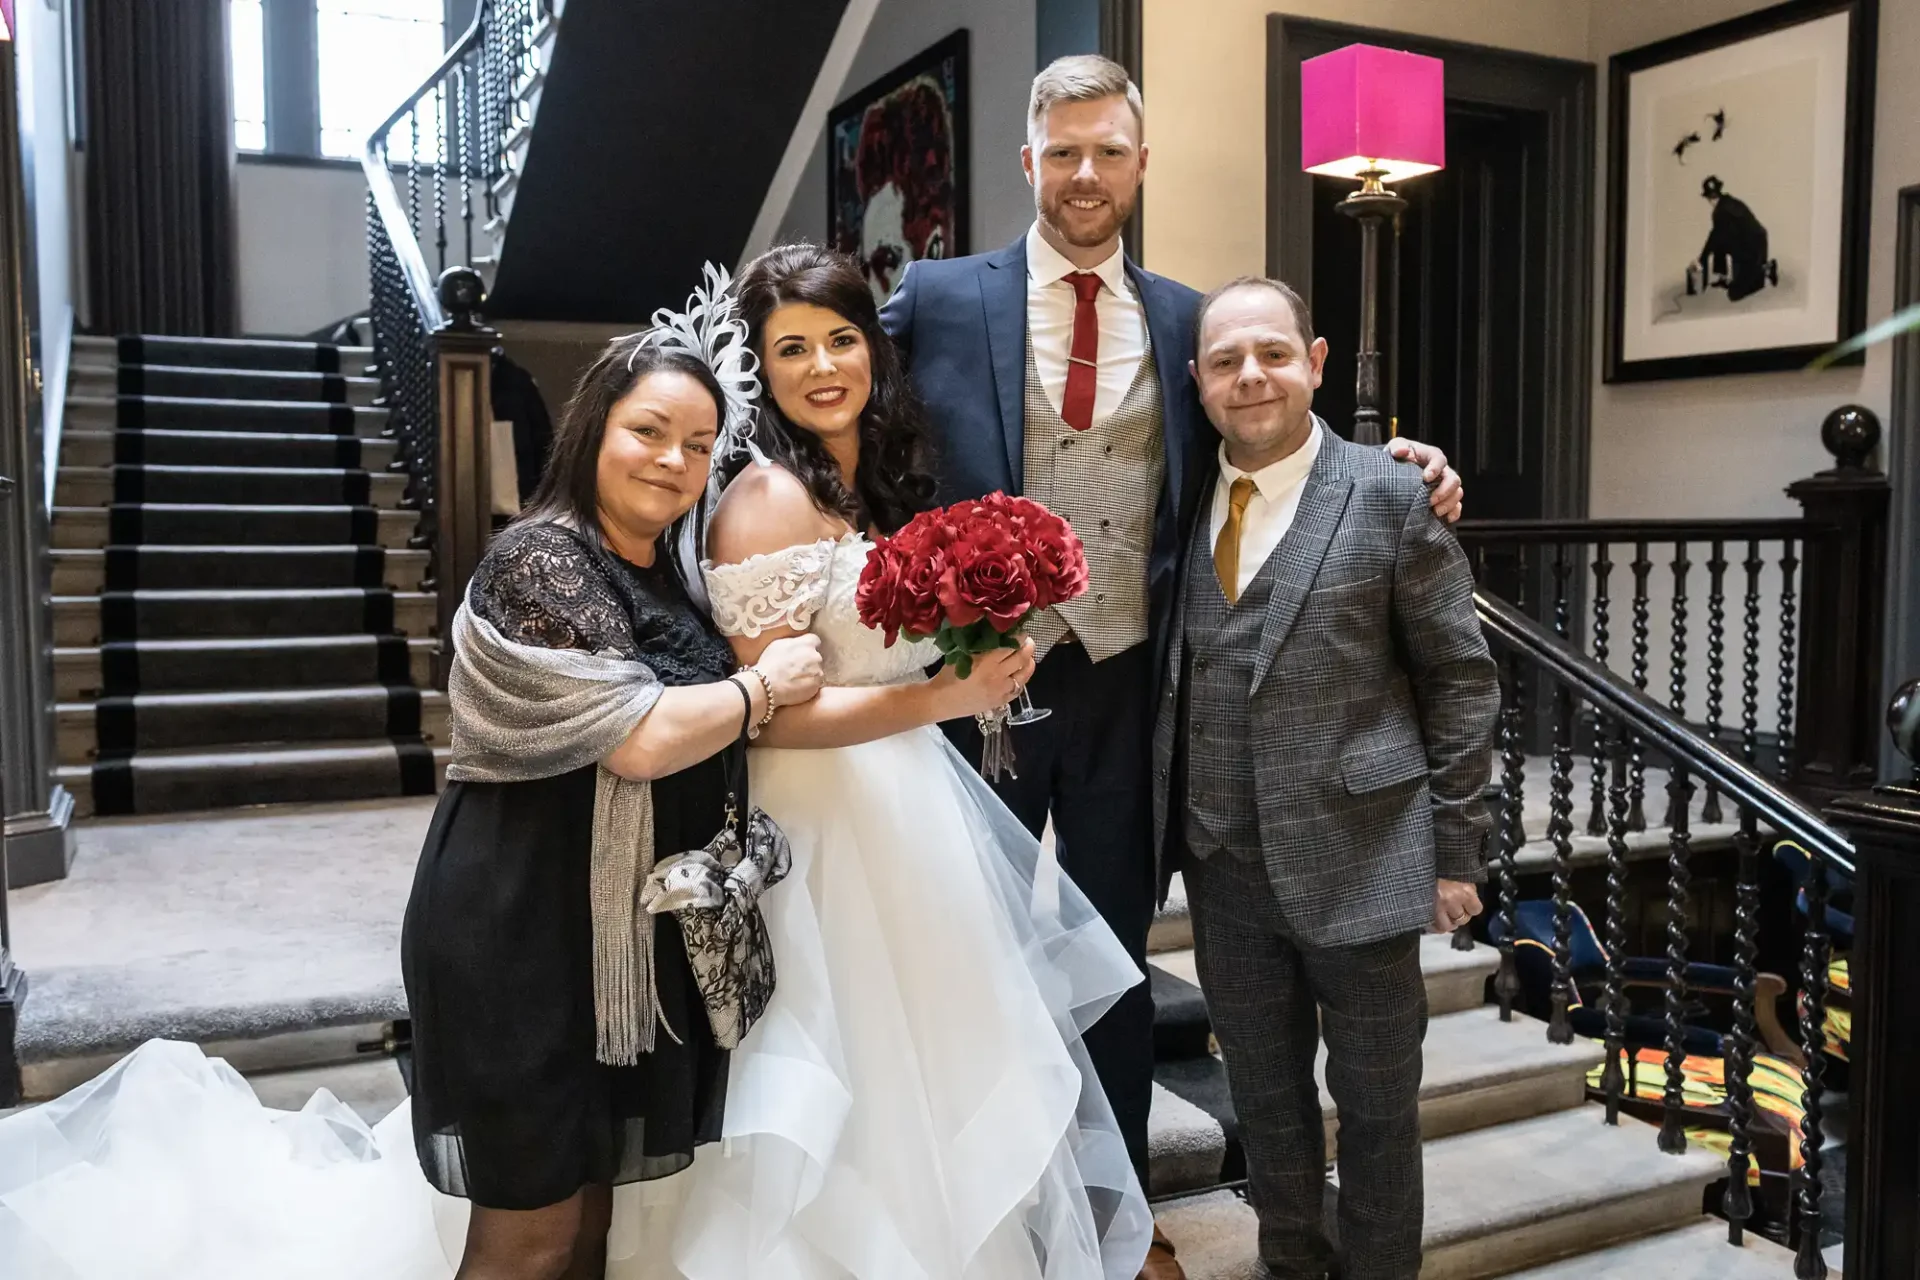 A bride holding a red bouquet is flanked by three guests in a stylish indoor setting with a staircase in the background.